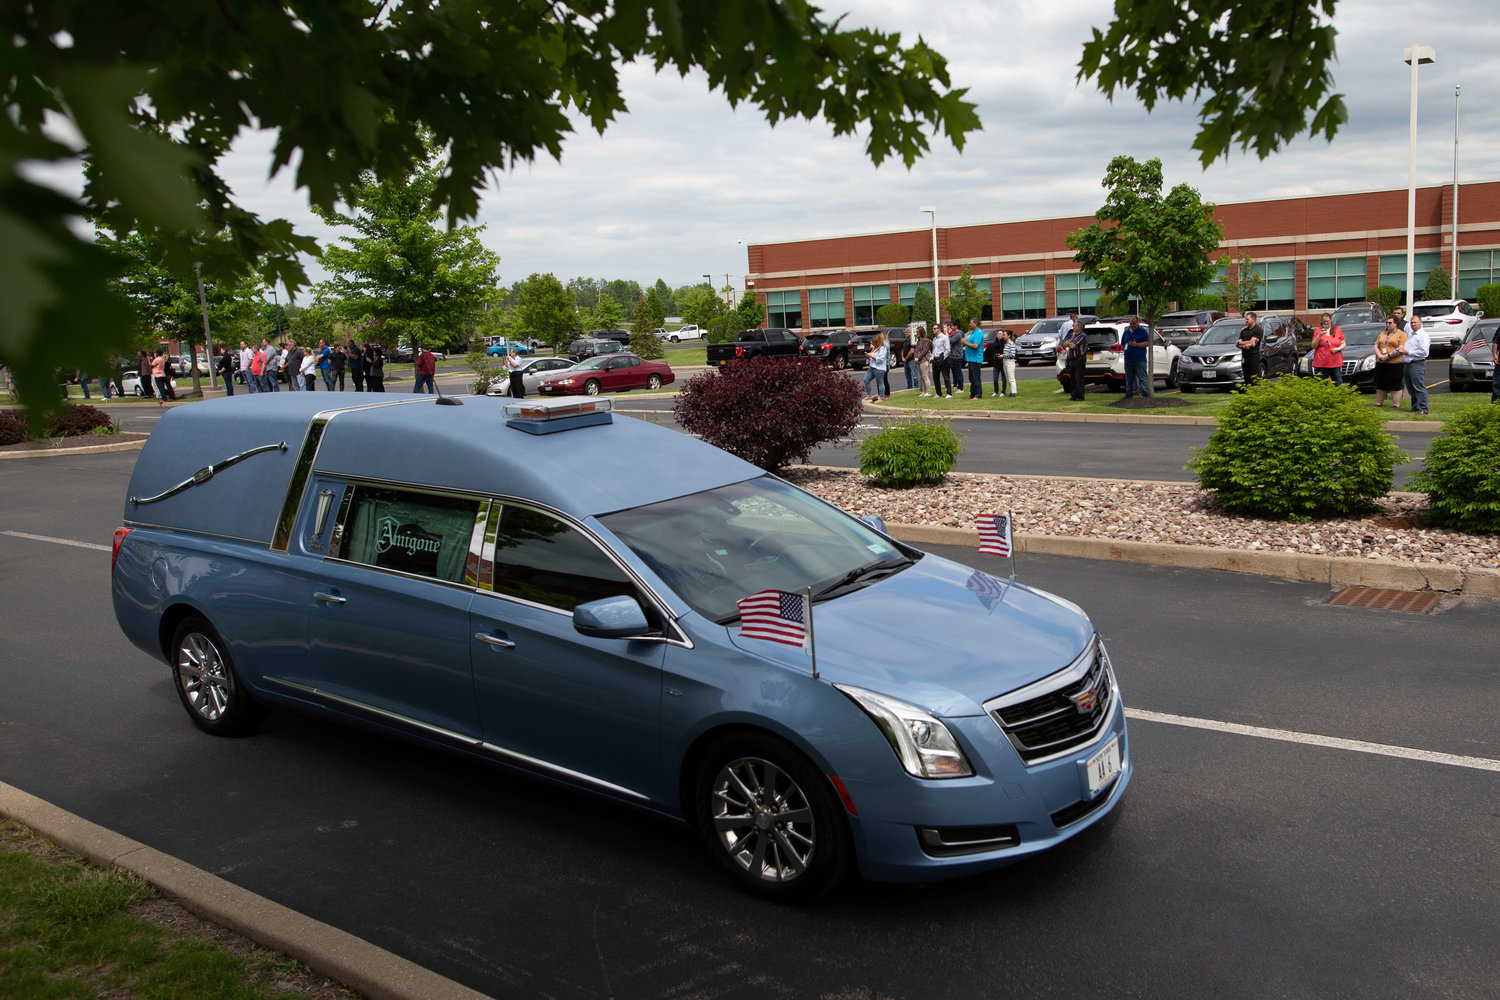 A hearse containing the casket for Aaron Salter Jr. leaves after a funeral service at The Chapel at Crosspoint on Wednesday, May 25, 2022, in Getzville, N.Y. Salter Jr. was killed in the Buffalo supermarket shooting on May 14. (AP Photo/Joshua Bessex)